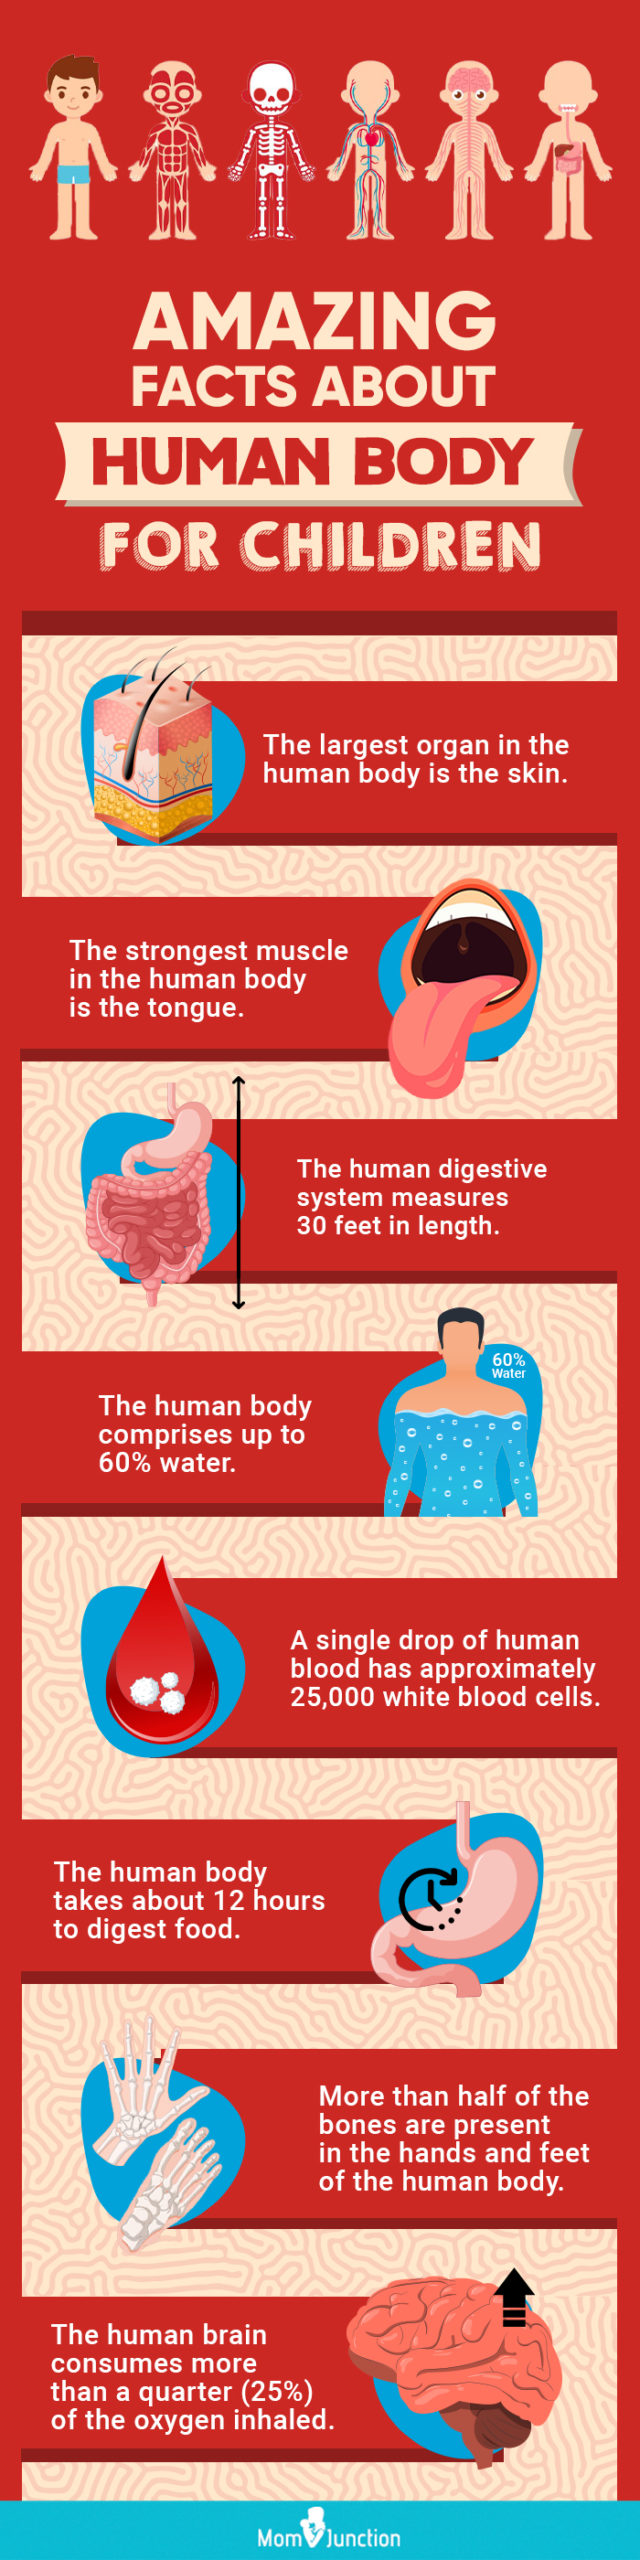 amazing facts about human body for children (infographic)